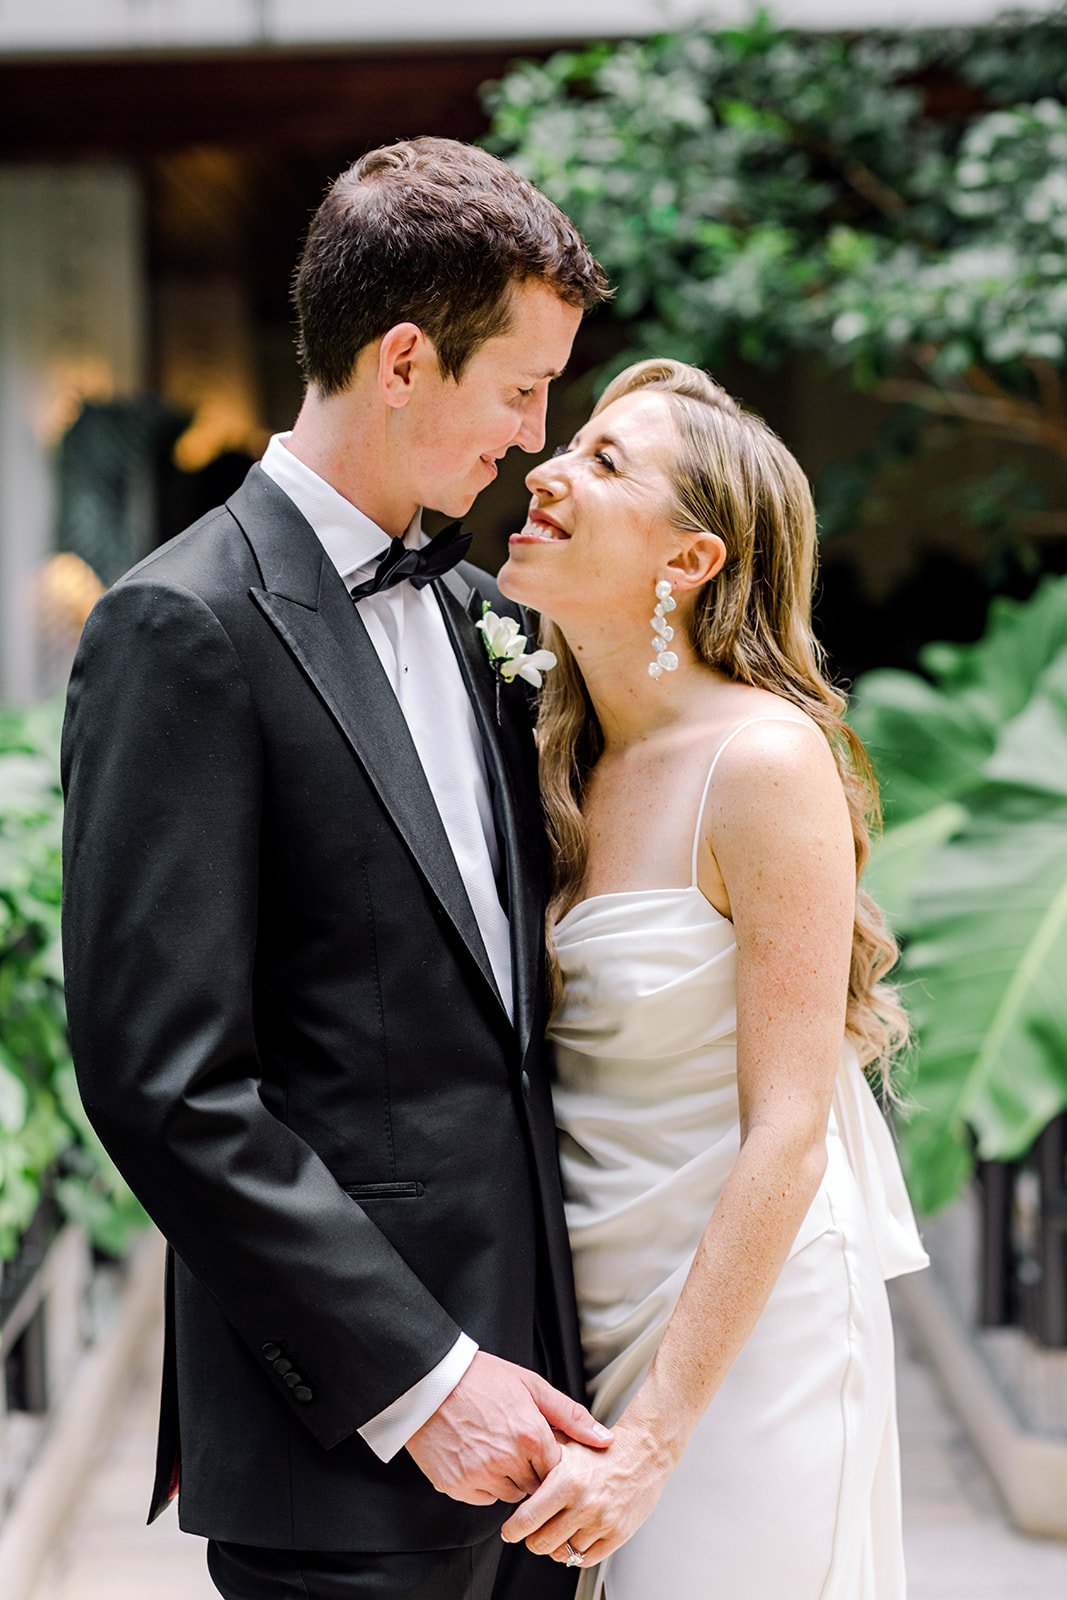 Bride and groom after first look on wedding day at Mayfair House Hotel & Garden in Coconut Grove, Miami, Florida.